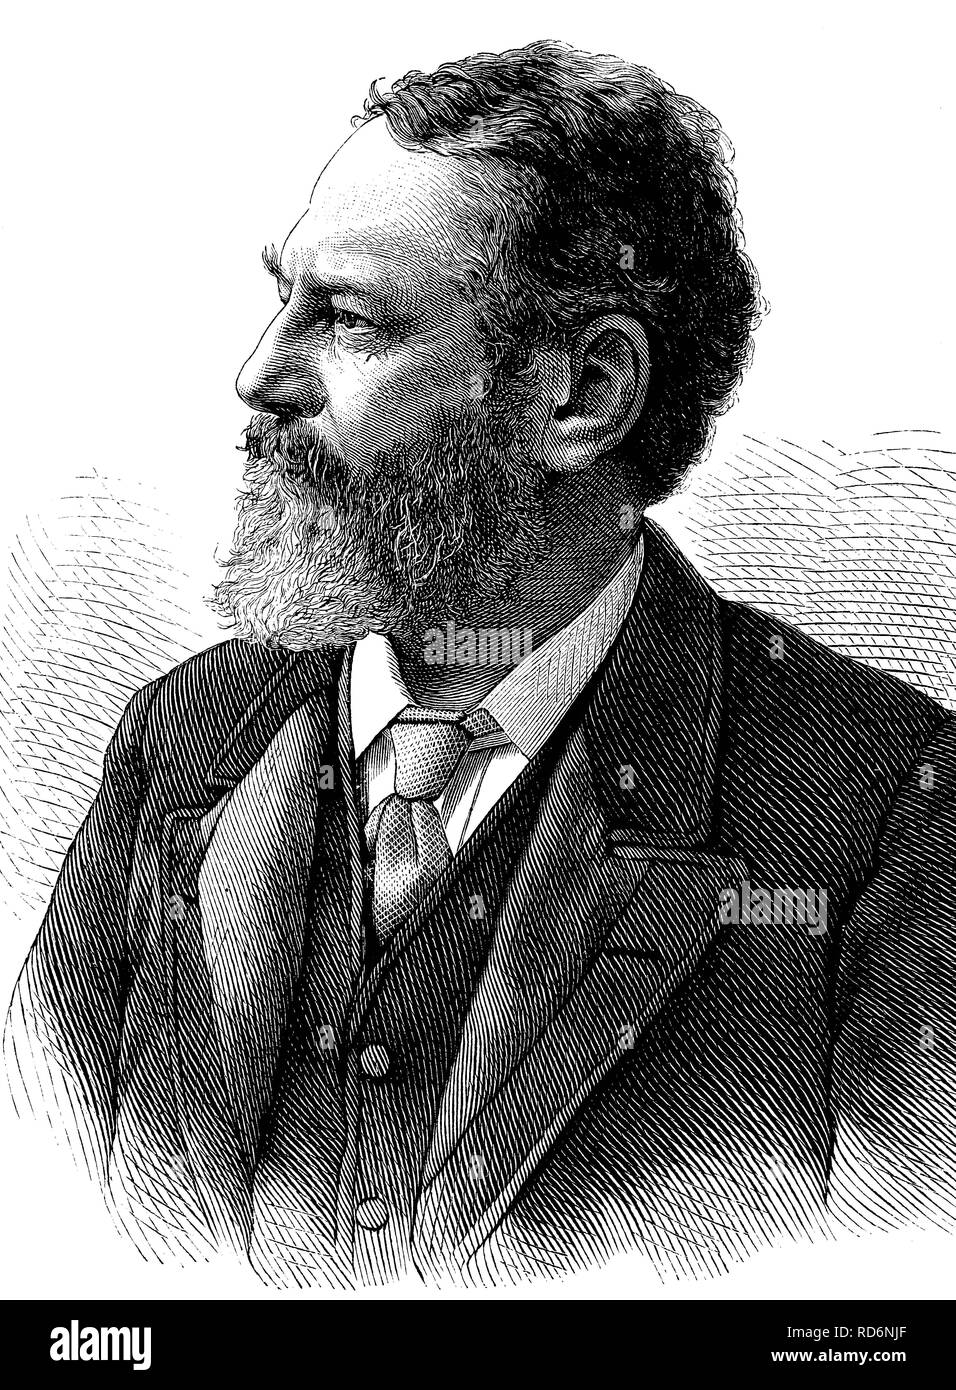 George Pendleton, 1825-1889, Minister of the United States in Berlin, historical illustration, circa 1886 Stock Photo